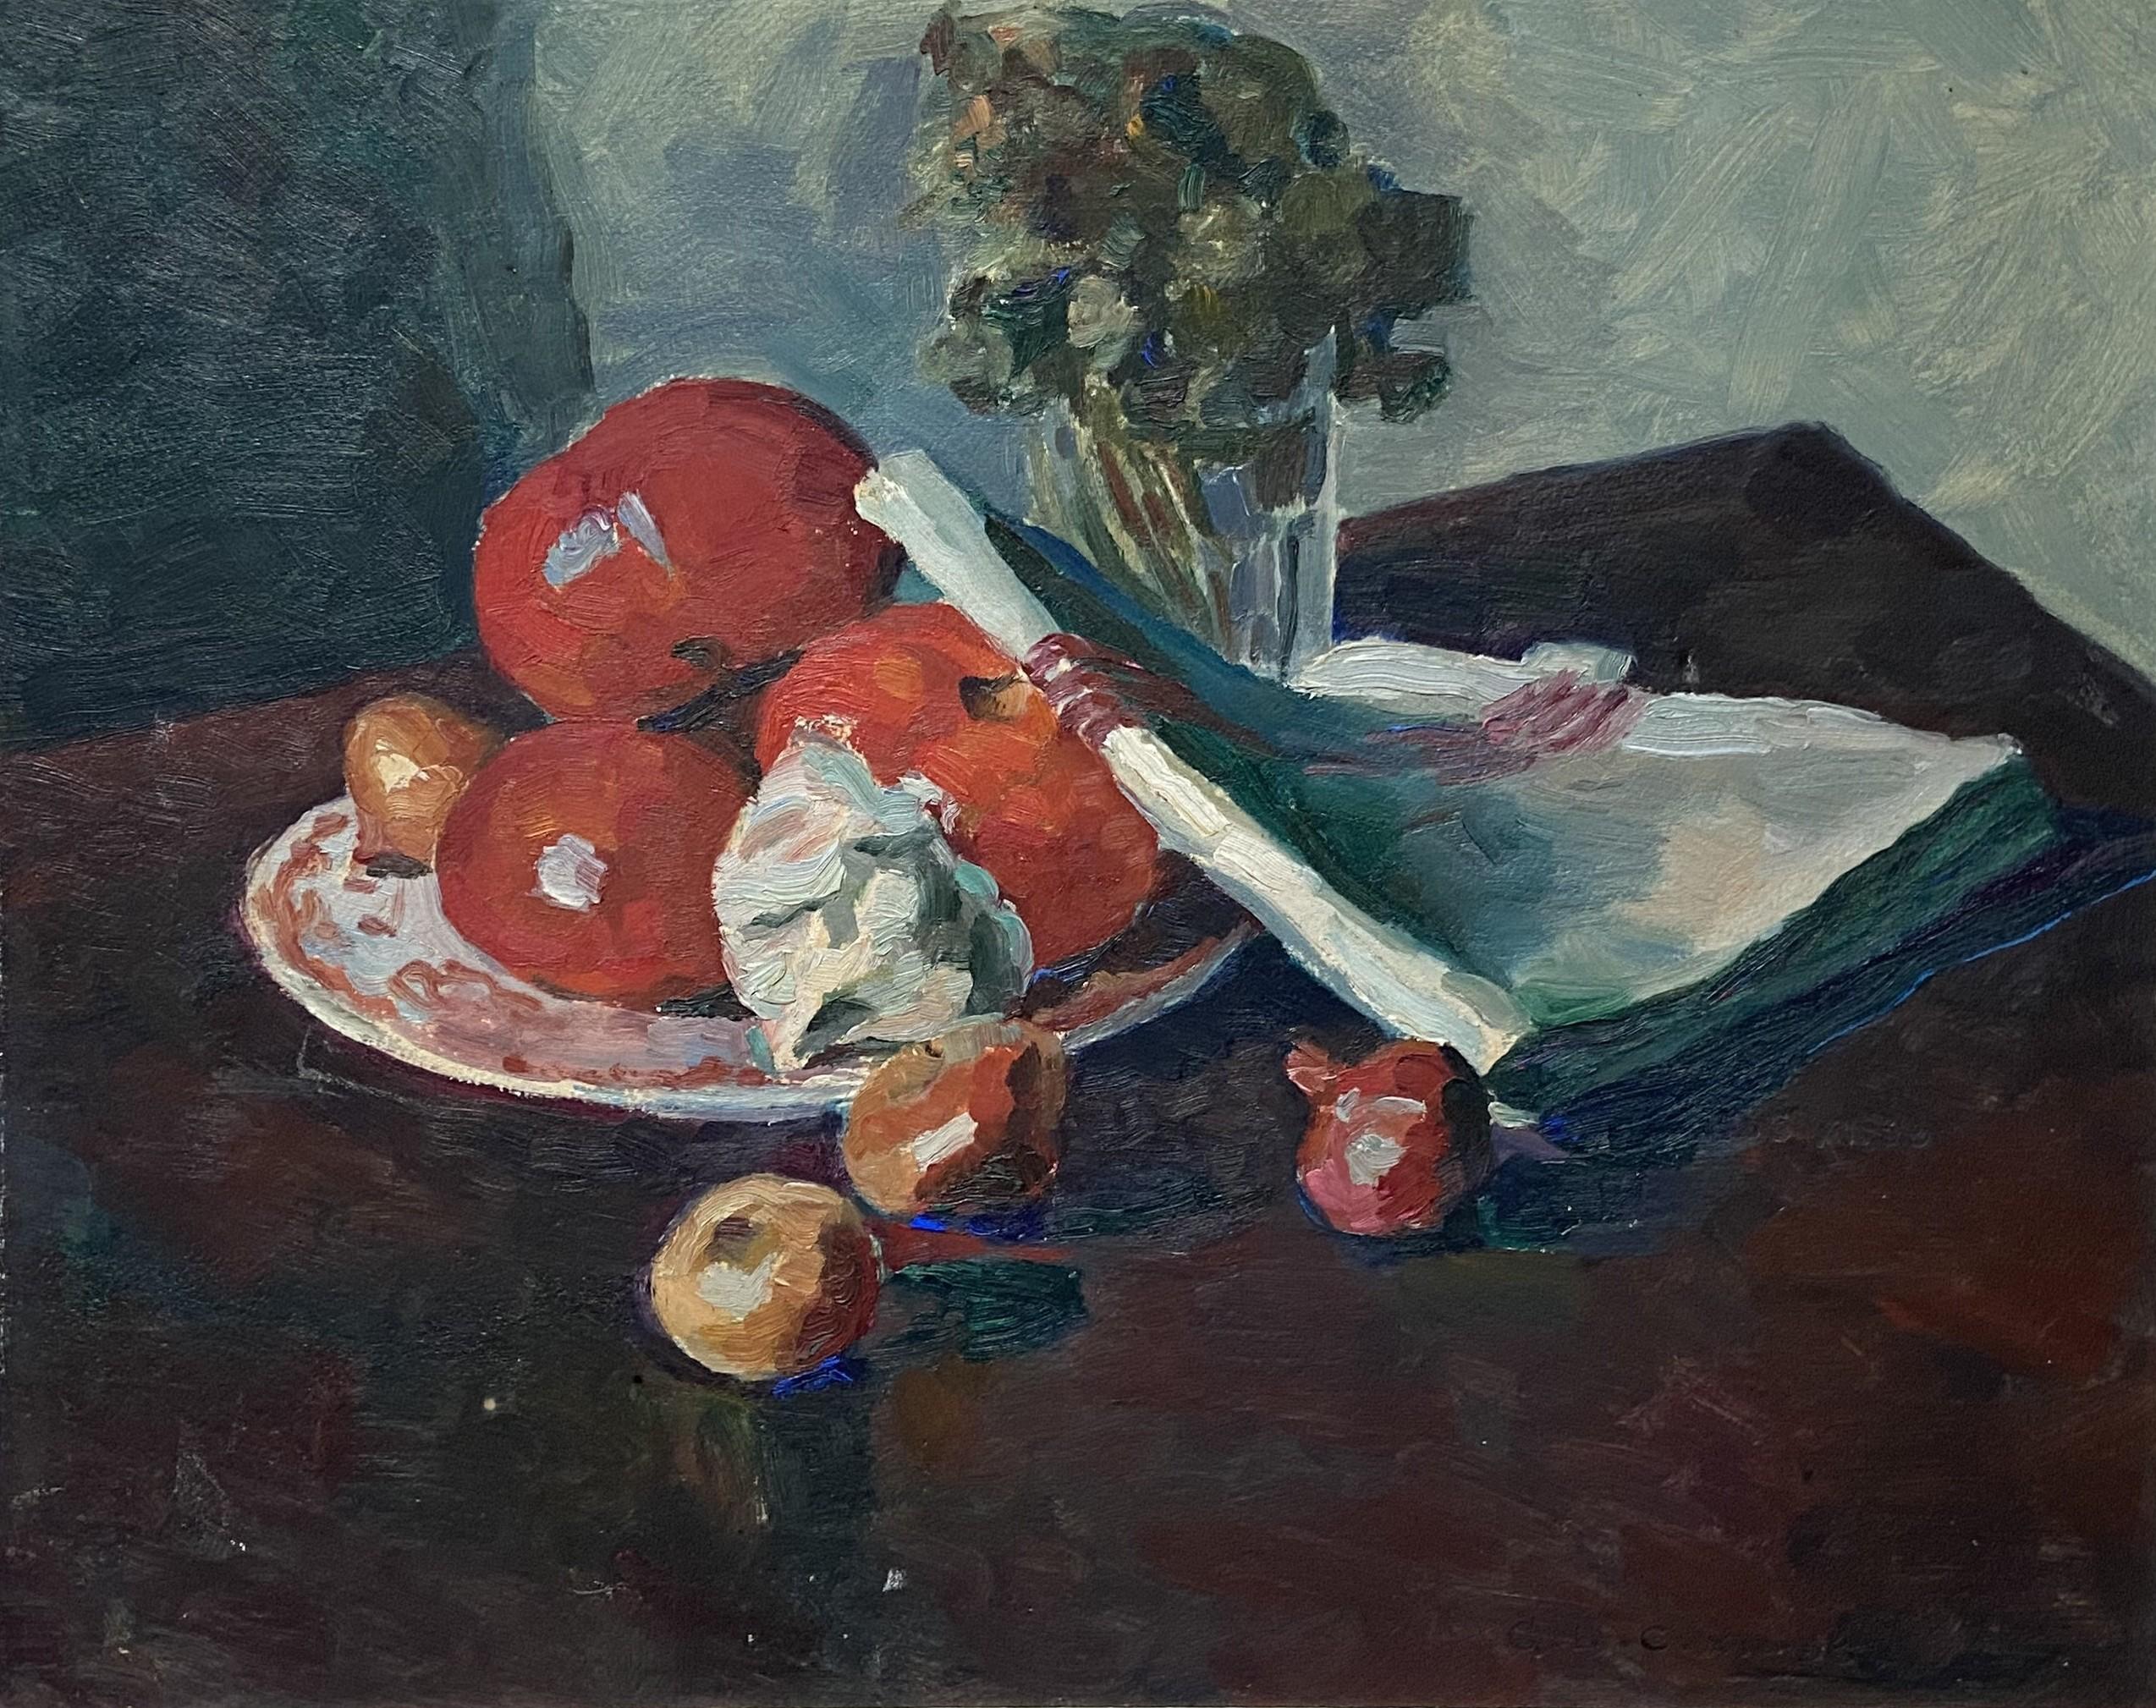 Georges Louis Claude (1879-1963)
Still life with fruits, 1938
oil on paper 
32 x 40 cm
In good condition
In a vintage white frame, 41.5 x 49 cm, numerous lacks of white painting (see photographs please)

Georges Louis Claude was born in Paris in